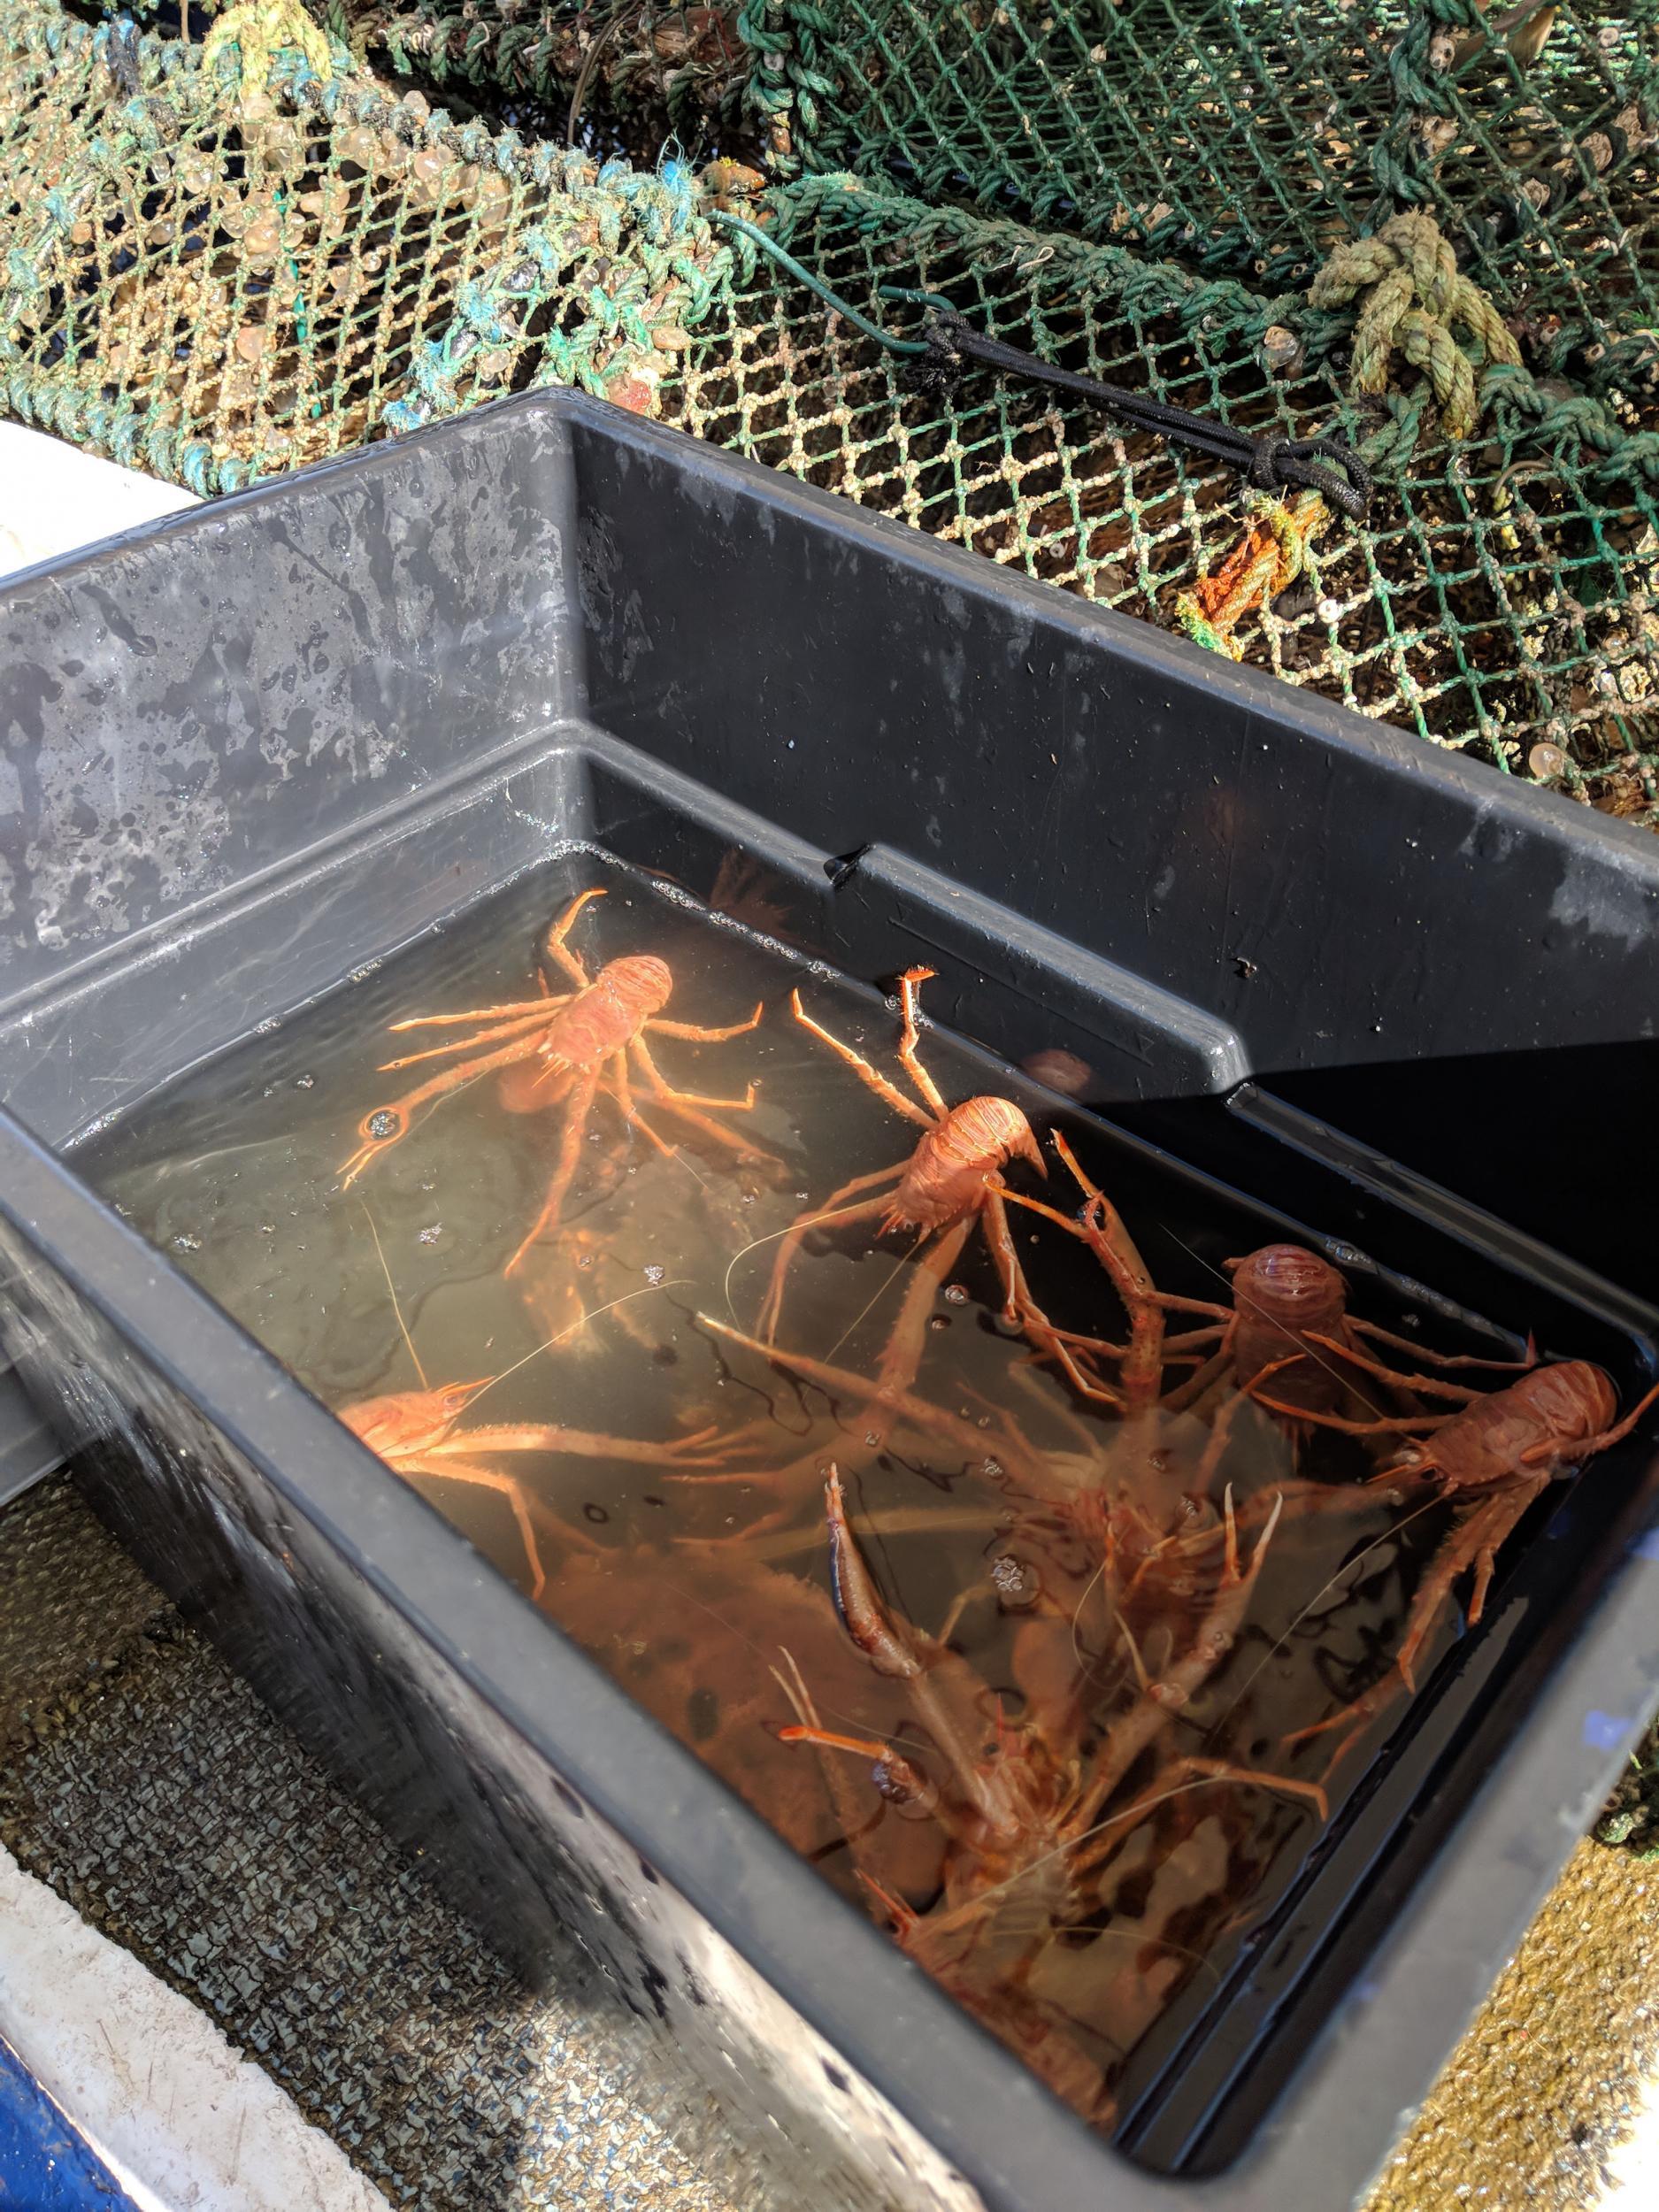 Ian’s catch contained mostly these squat lobsters, along with some lobsters, brown crabs and velvet crabs if they were big enough. Anything too small is thrown back in (Emma Henderson)